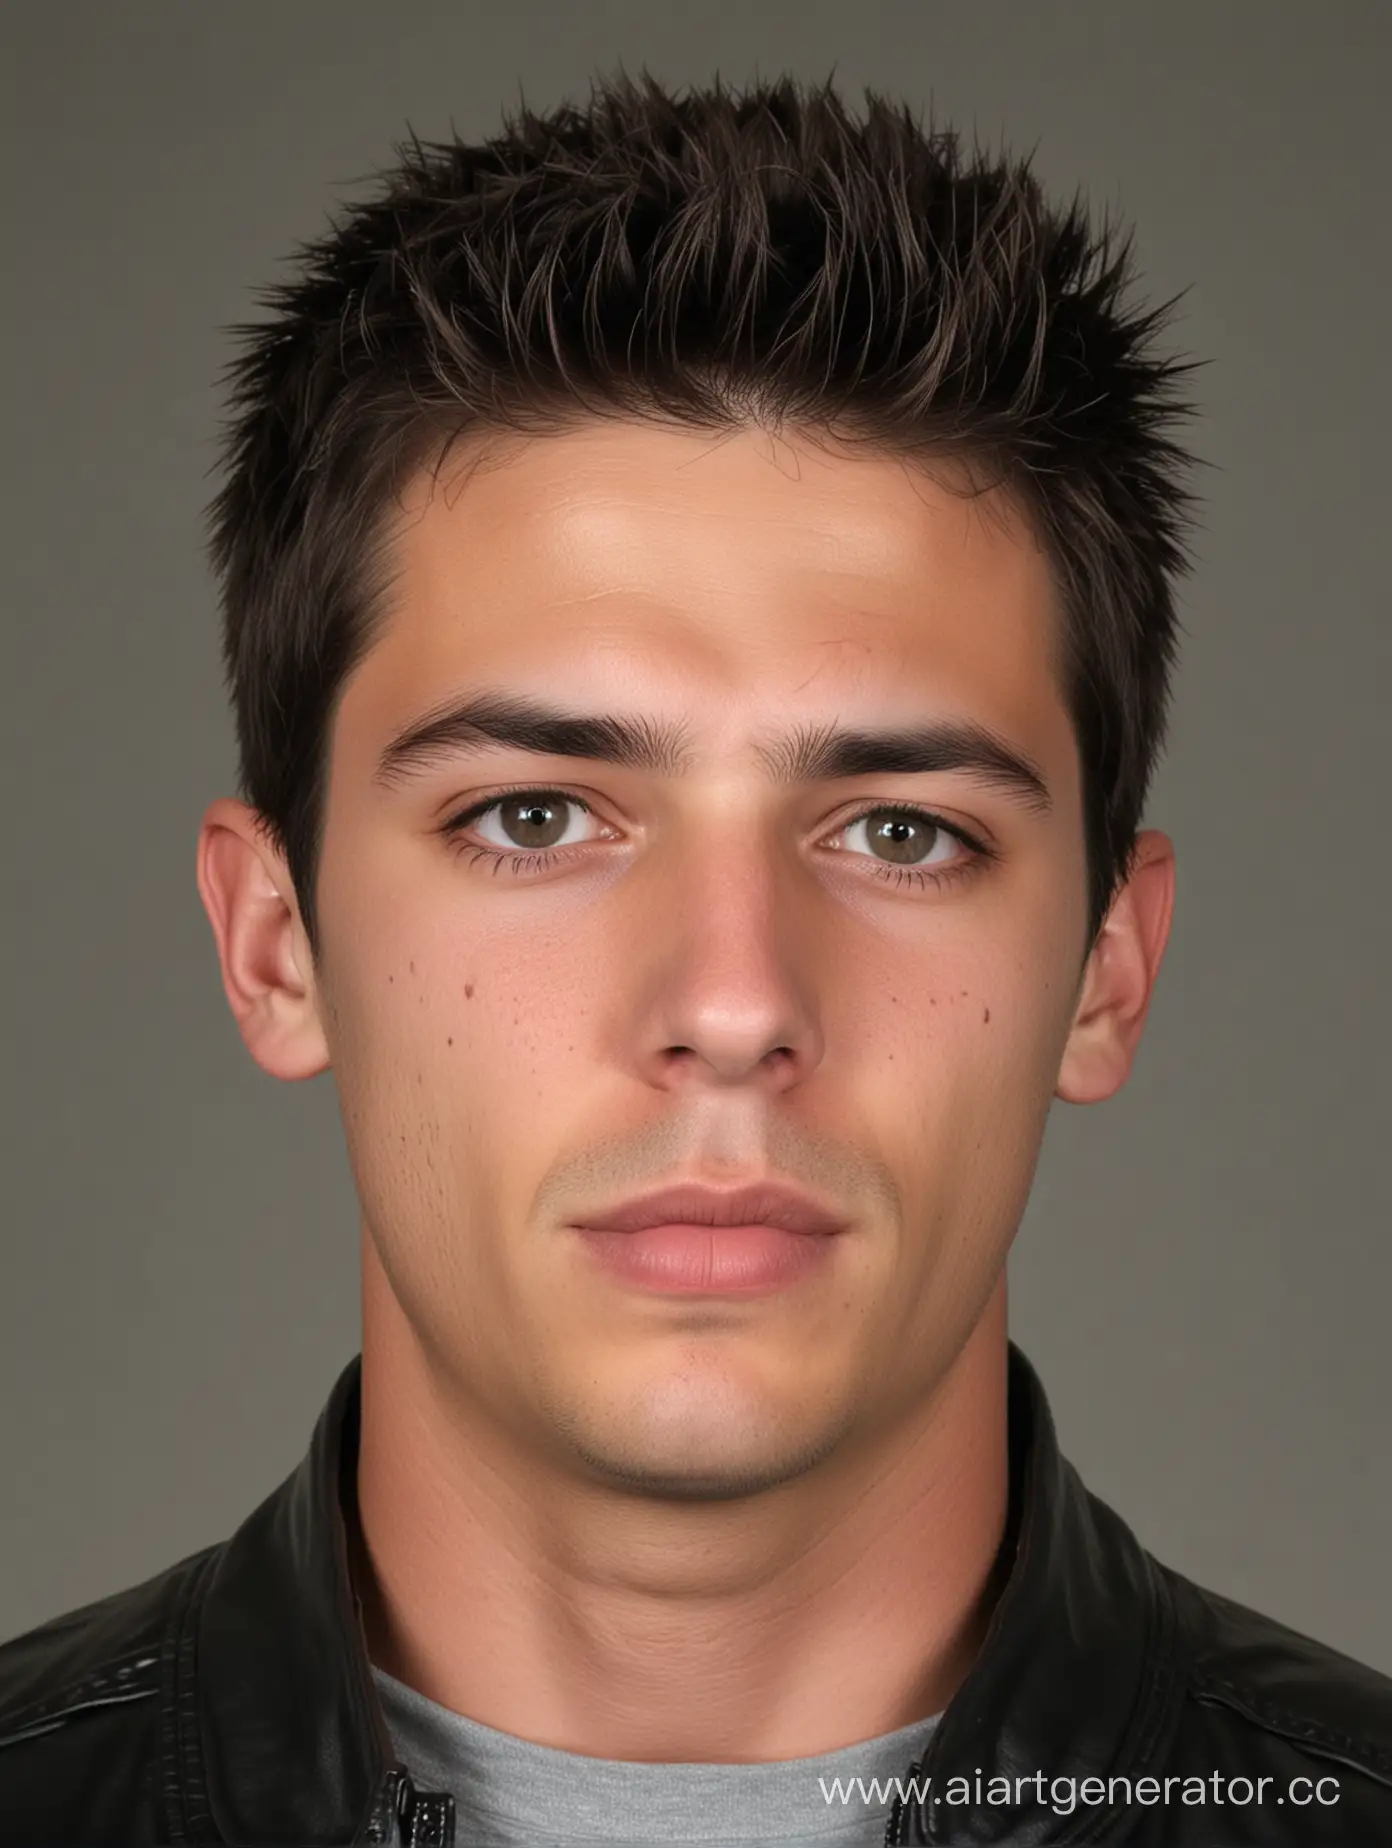 Neutral-Young-American-Male-Mugshot-in-Black-Leather-Jacket